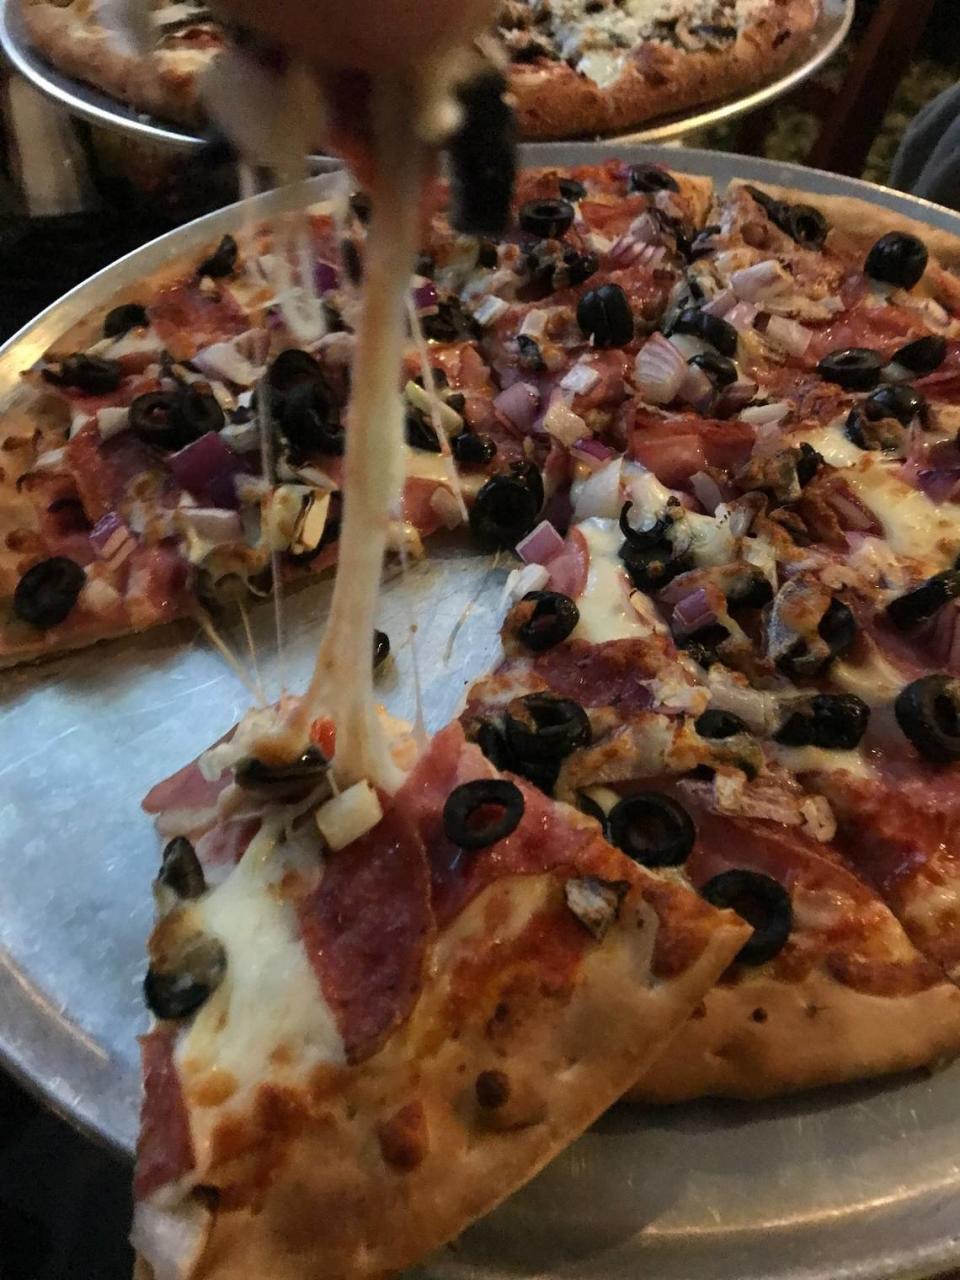 This 8-inch mini “build-your-own” gluten-free pizza at Luigi’s Pizza in Cambria produces an impressive “cheese pull” from the melted mozzarella cheese. The pull from a nearby 16-inch large stretched out to more than a foot.